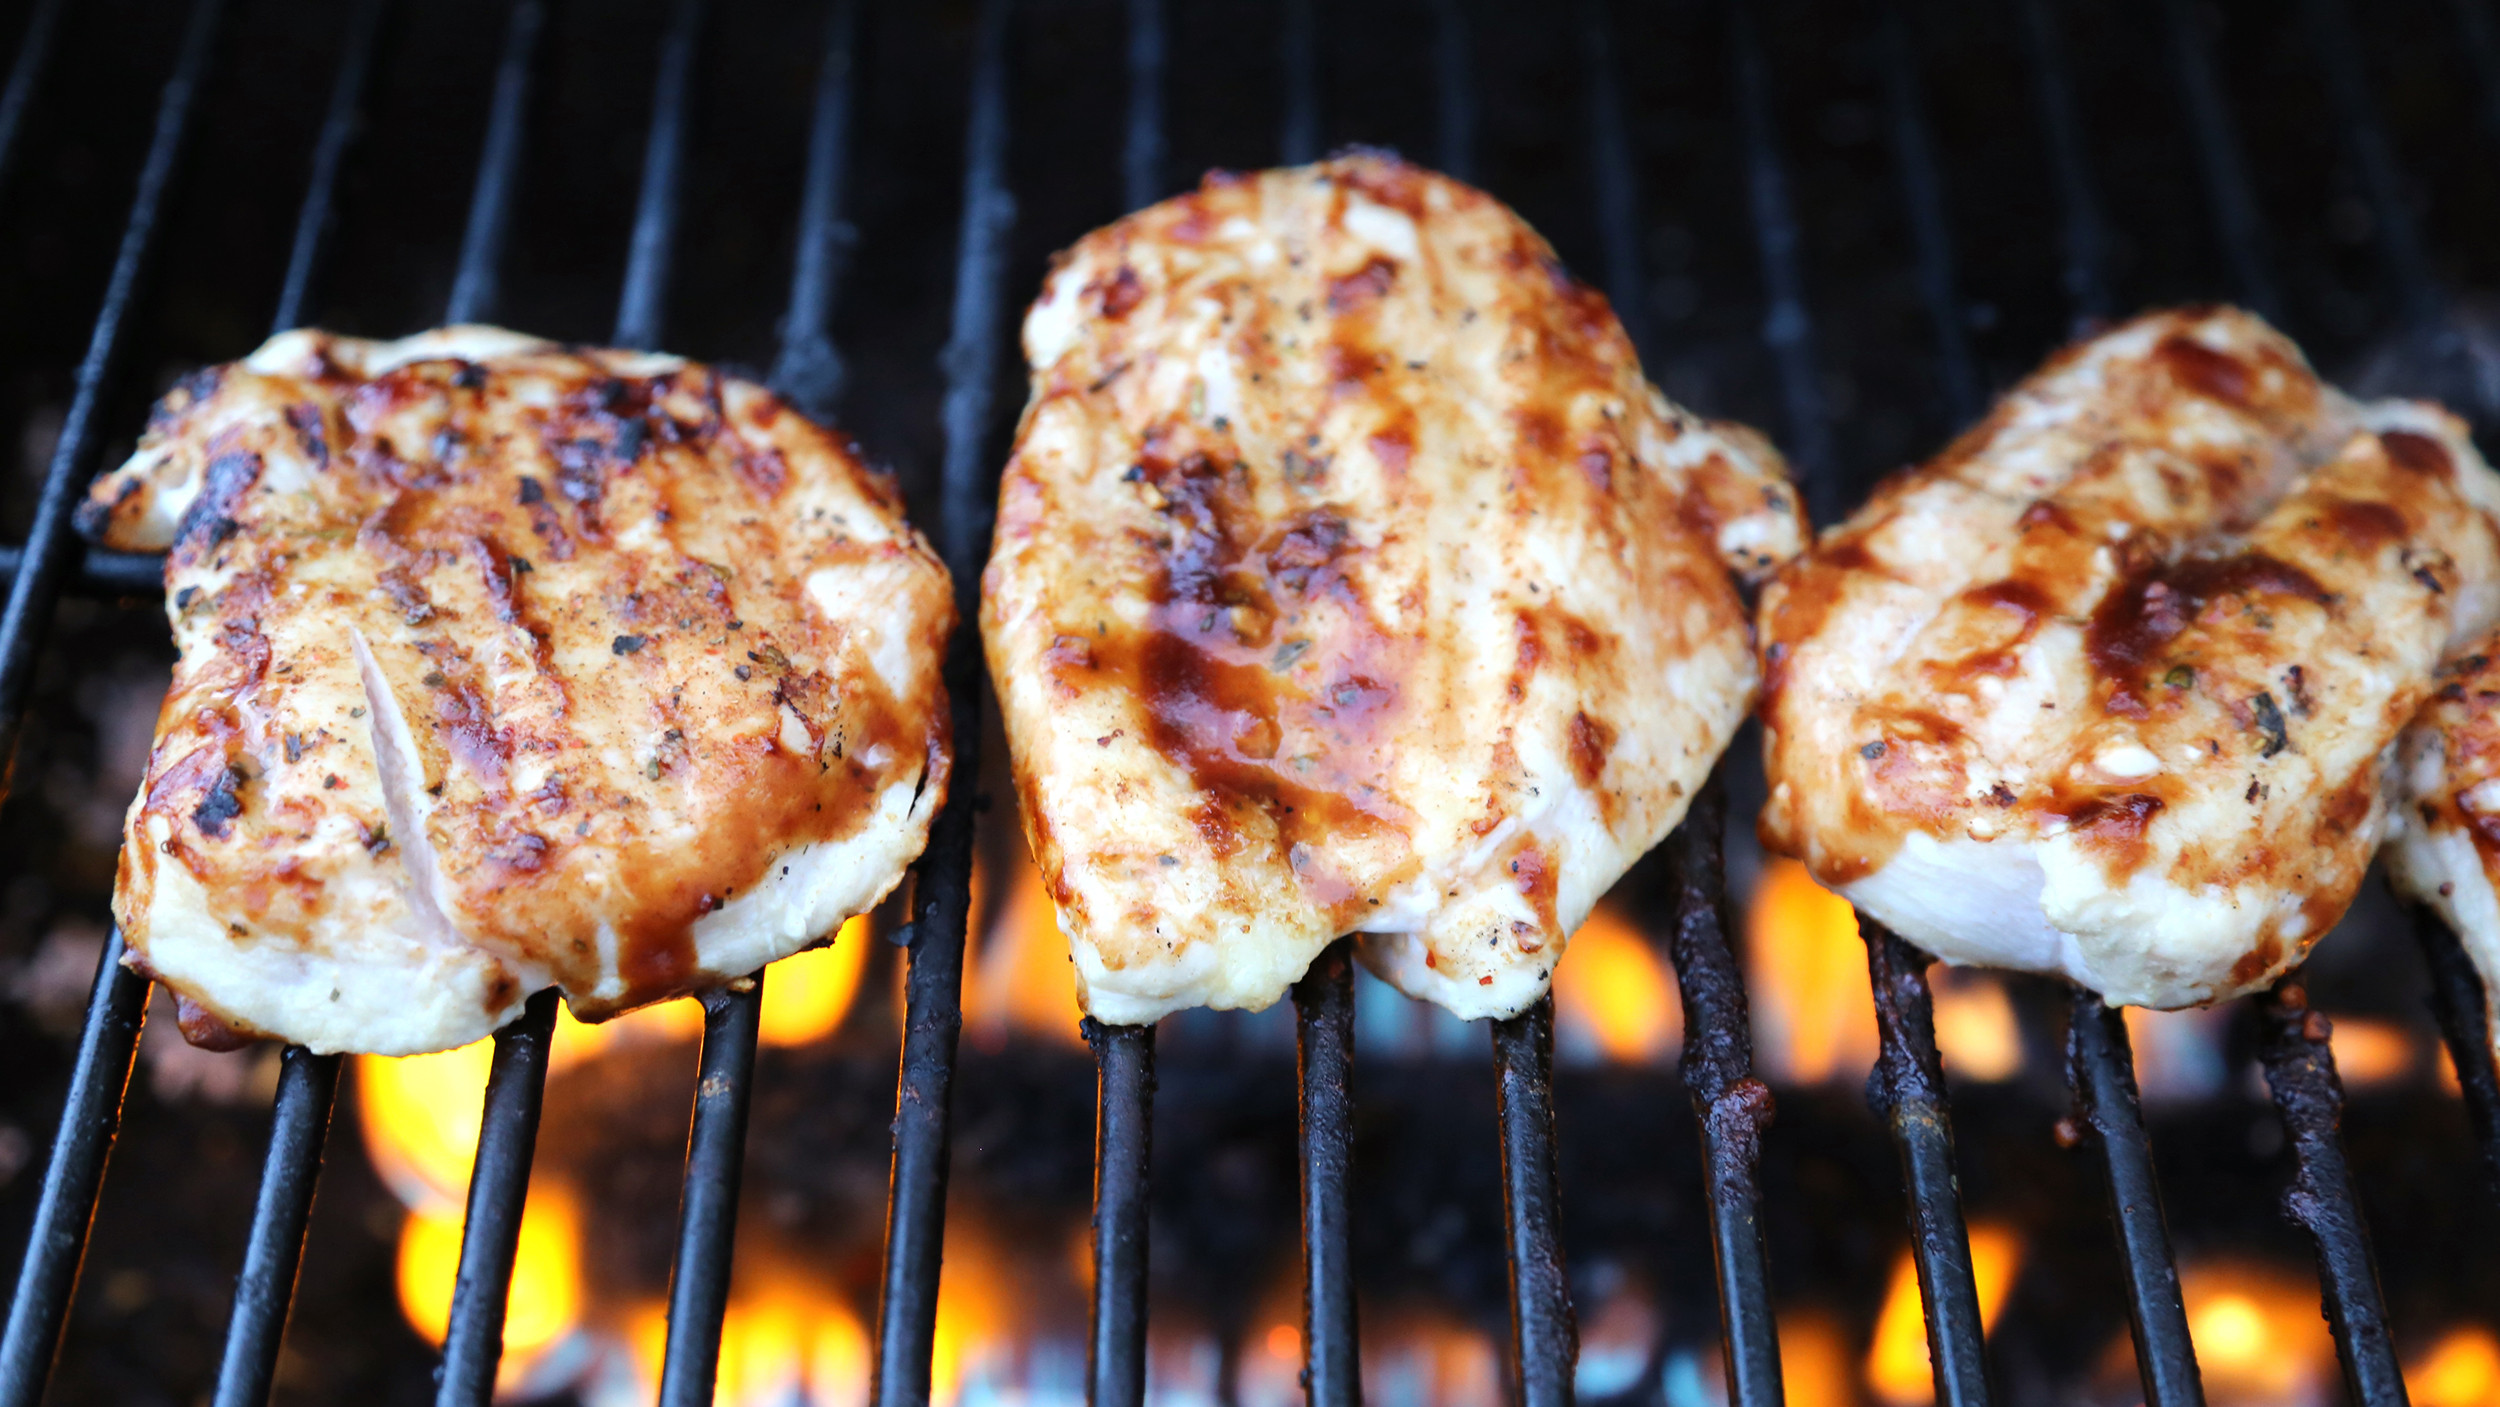 Grilling Chicken Breasts
 How to grill chicken breasts perfectly every time TODAY